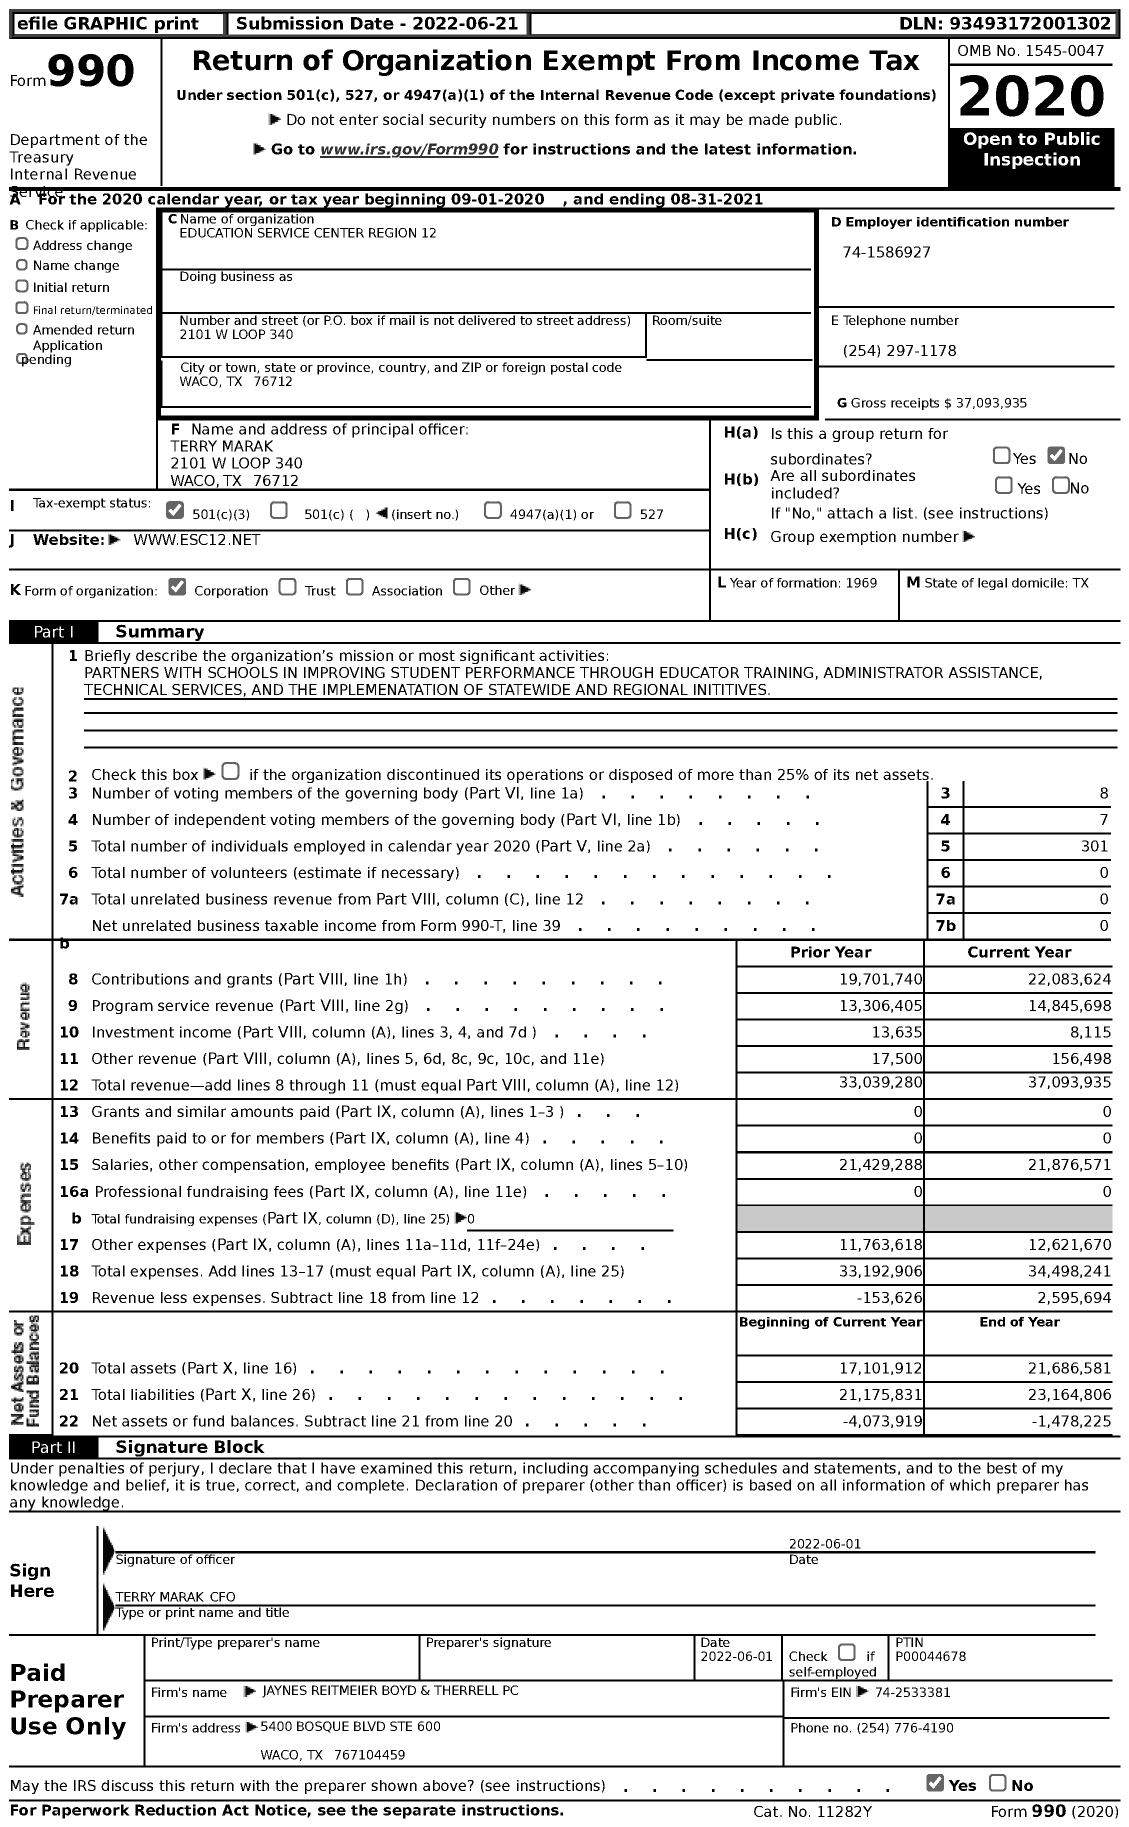 Image of first page of 2020 Form 990 for Education Service Center Region 12 (ESC Region 12)